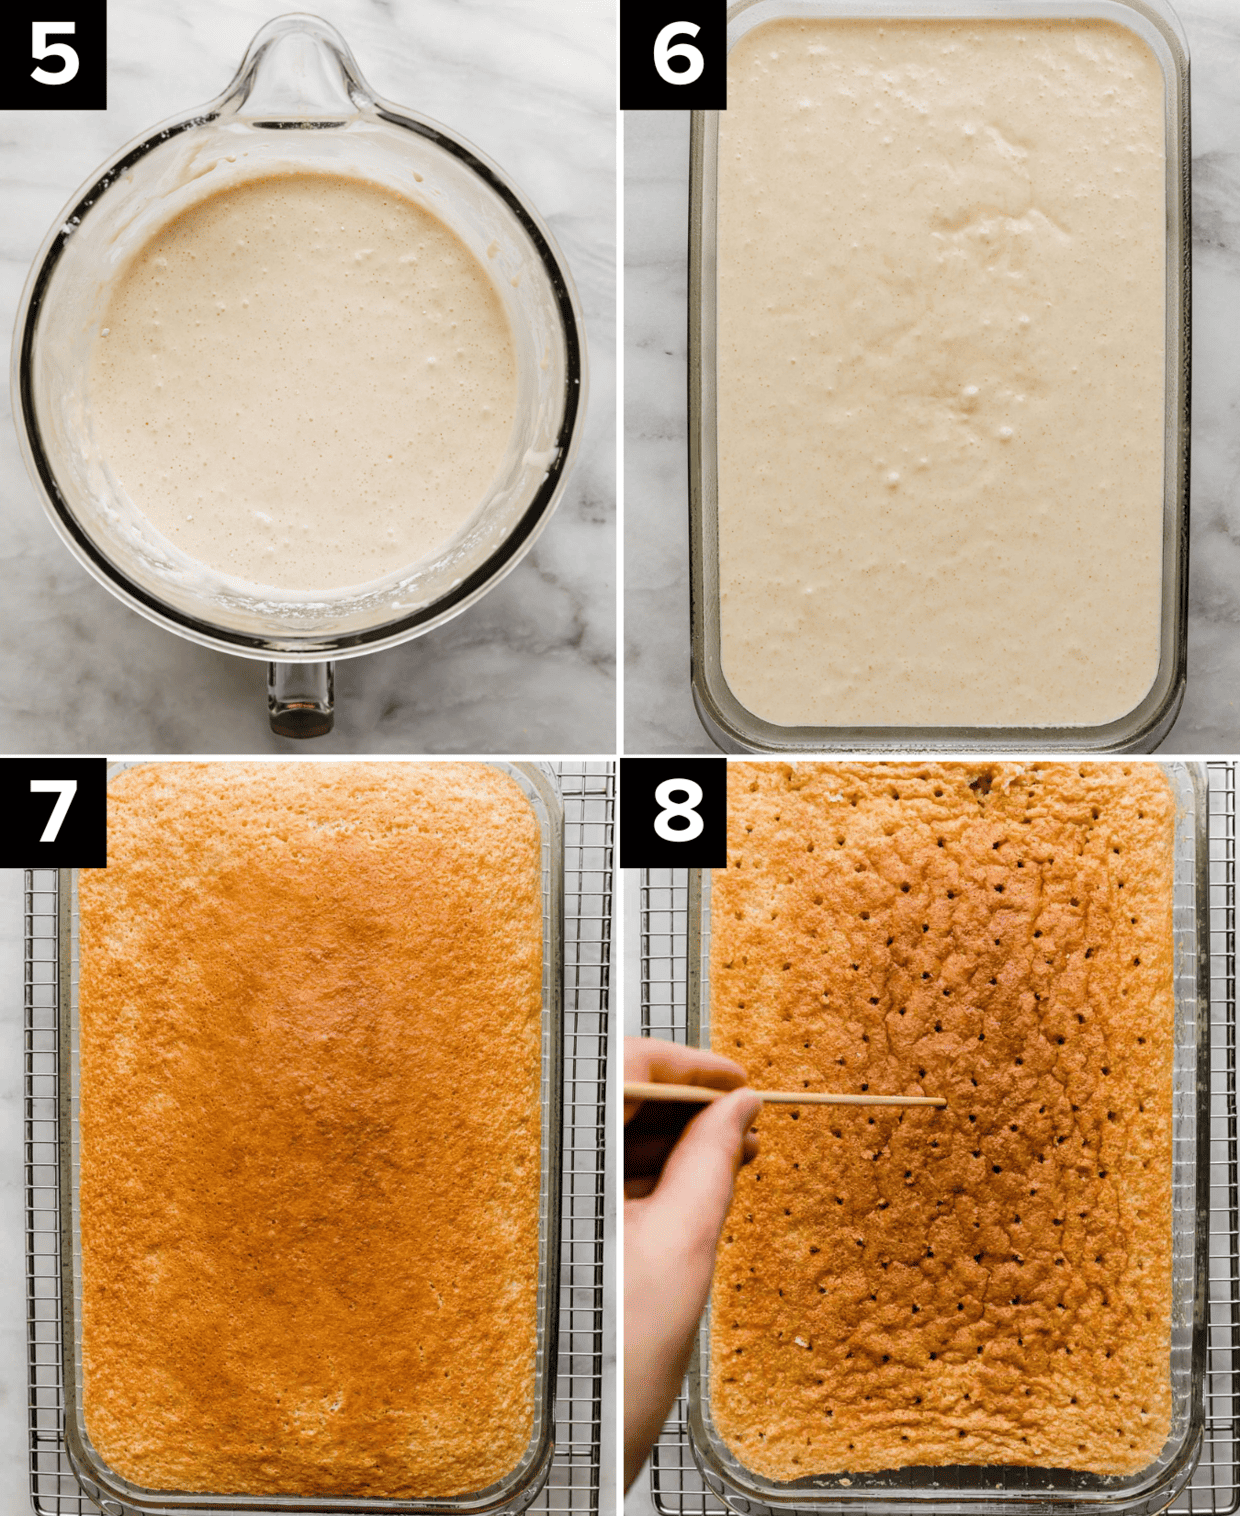 Four photos showing the best Tres Leches Cake batter in a glass bowl, then it in a baking dish, and then baked, and a skewer poking holes around the entire cake.